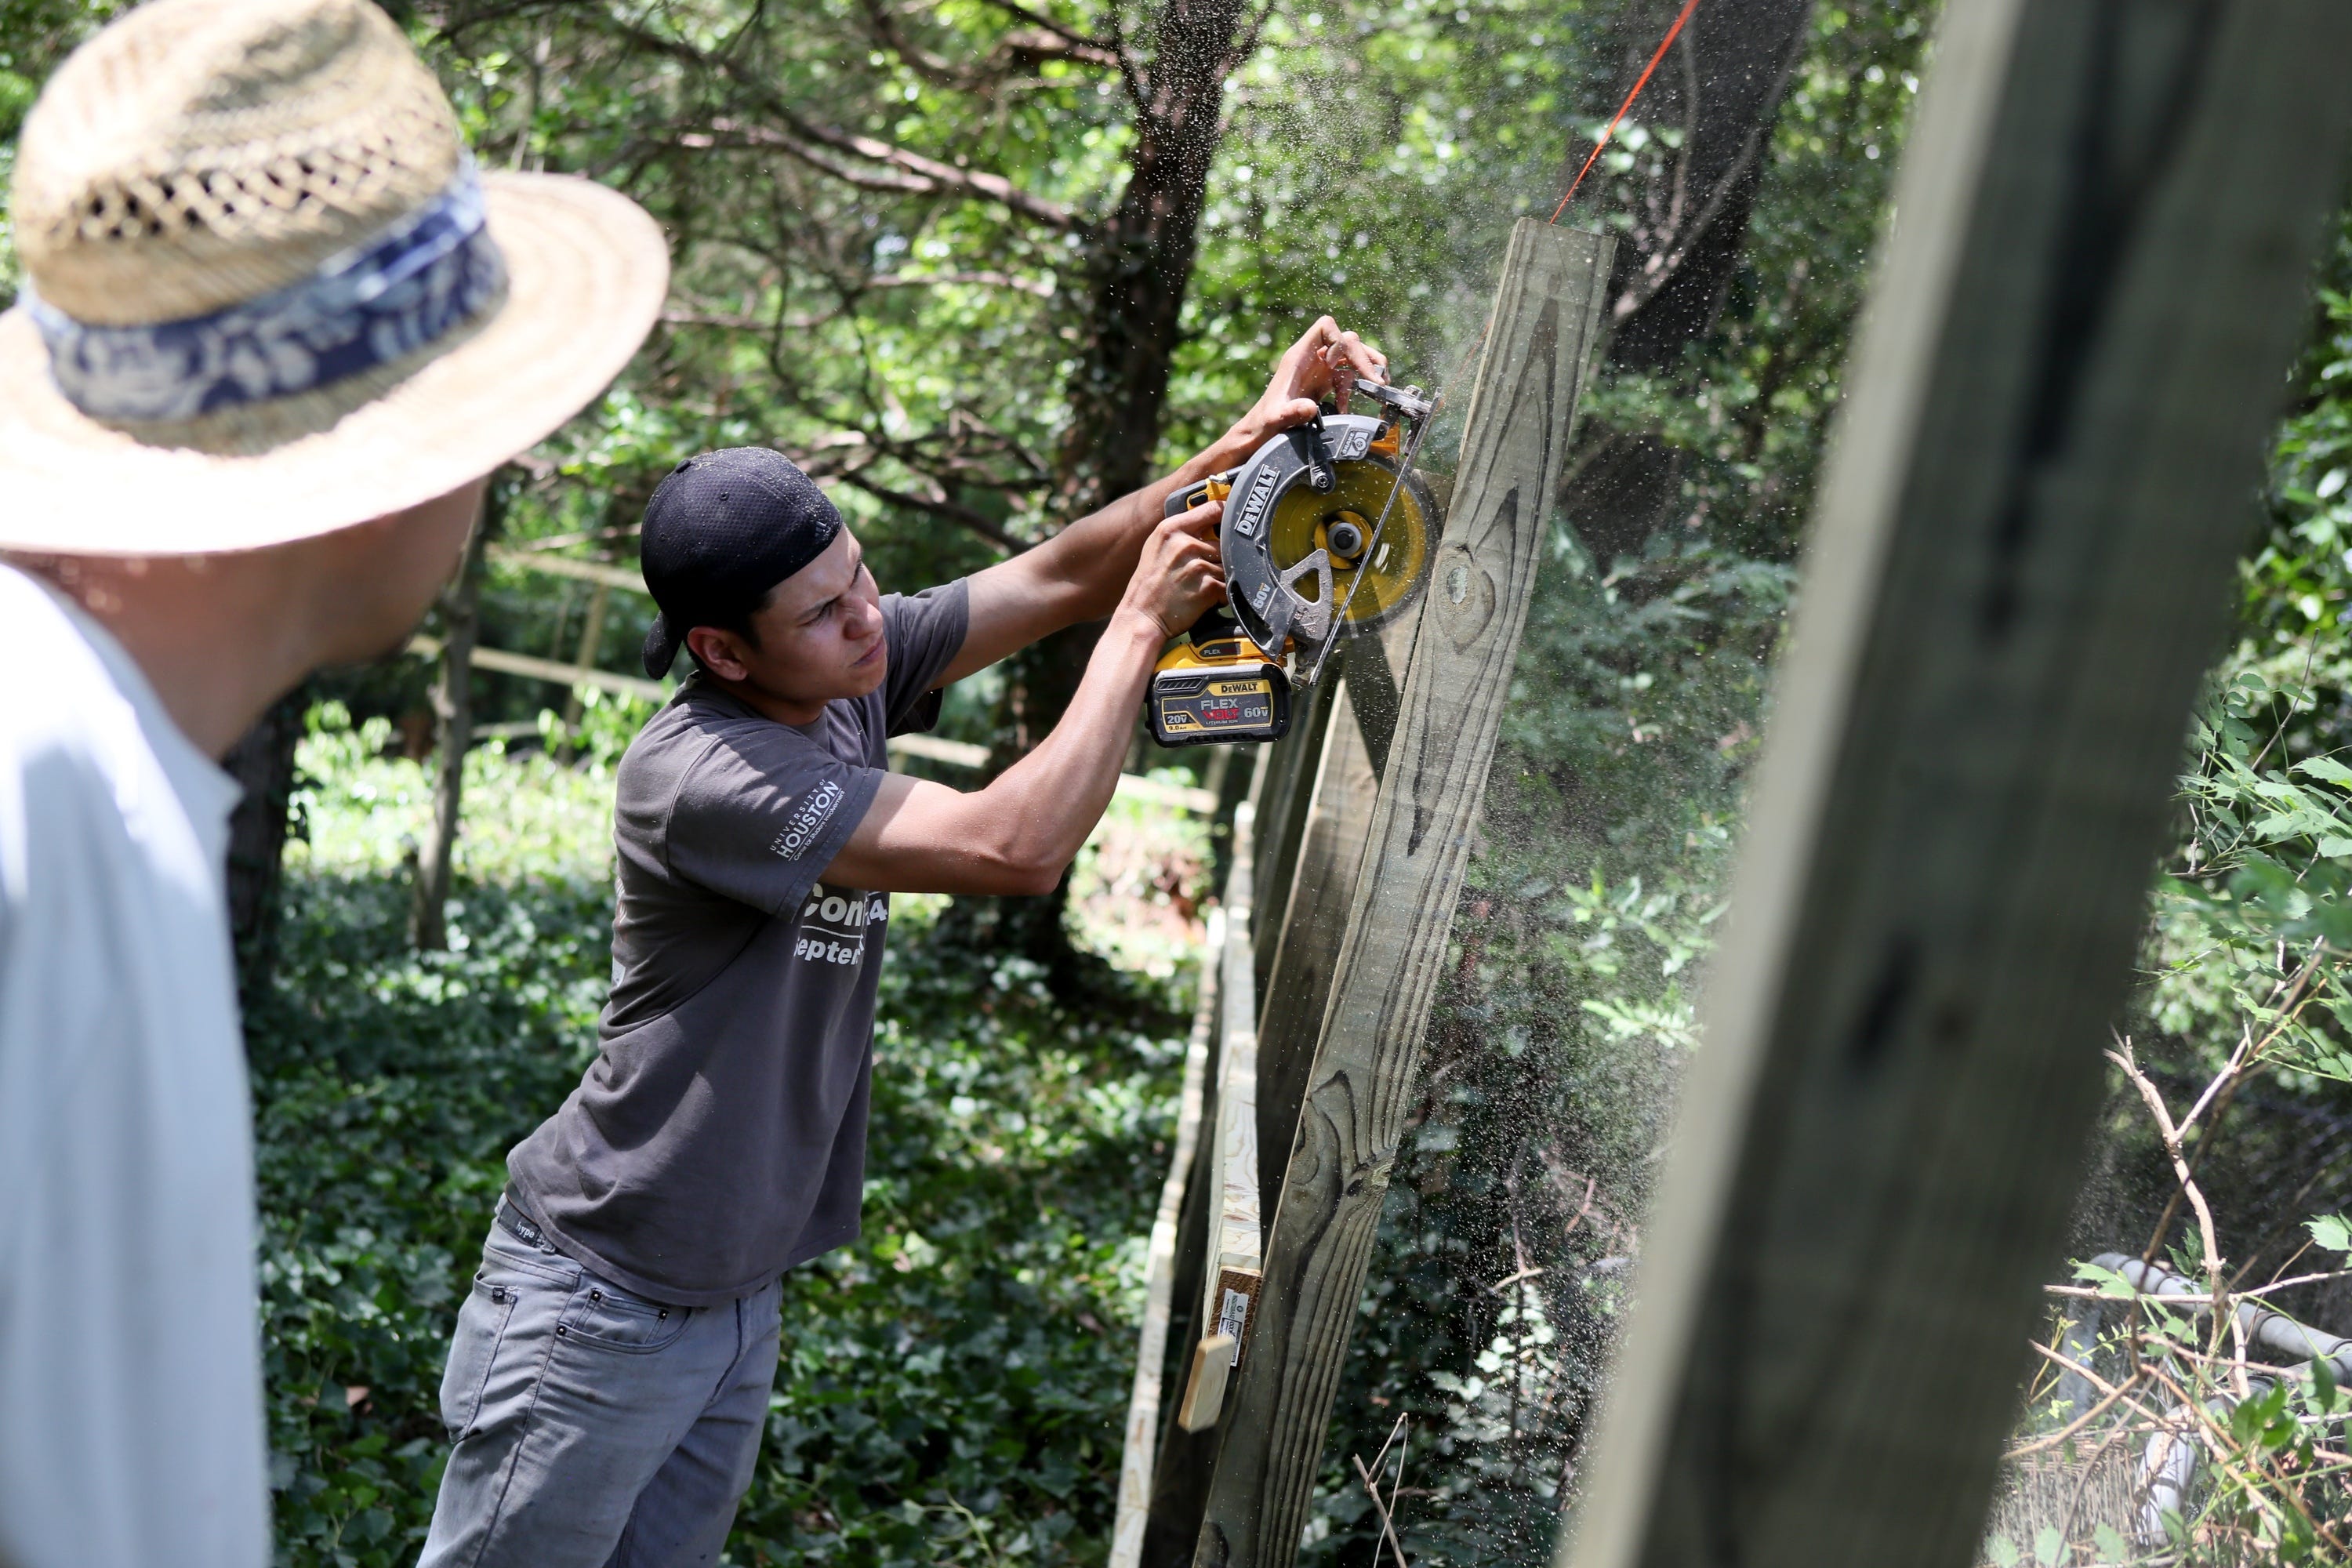 Oscar Gutierrez and a co-worker build a fence in June in a backyard in Memphis. Gutierrez joined a small construction company a few months ago with no prior experience and is learning on the job. He’s originally from Honduras and has a pending immigration court case as he seeks to remain in the United States.